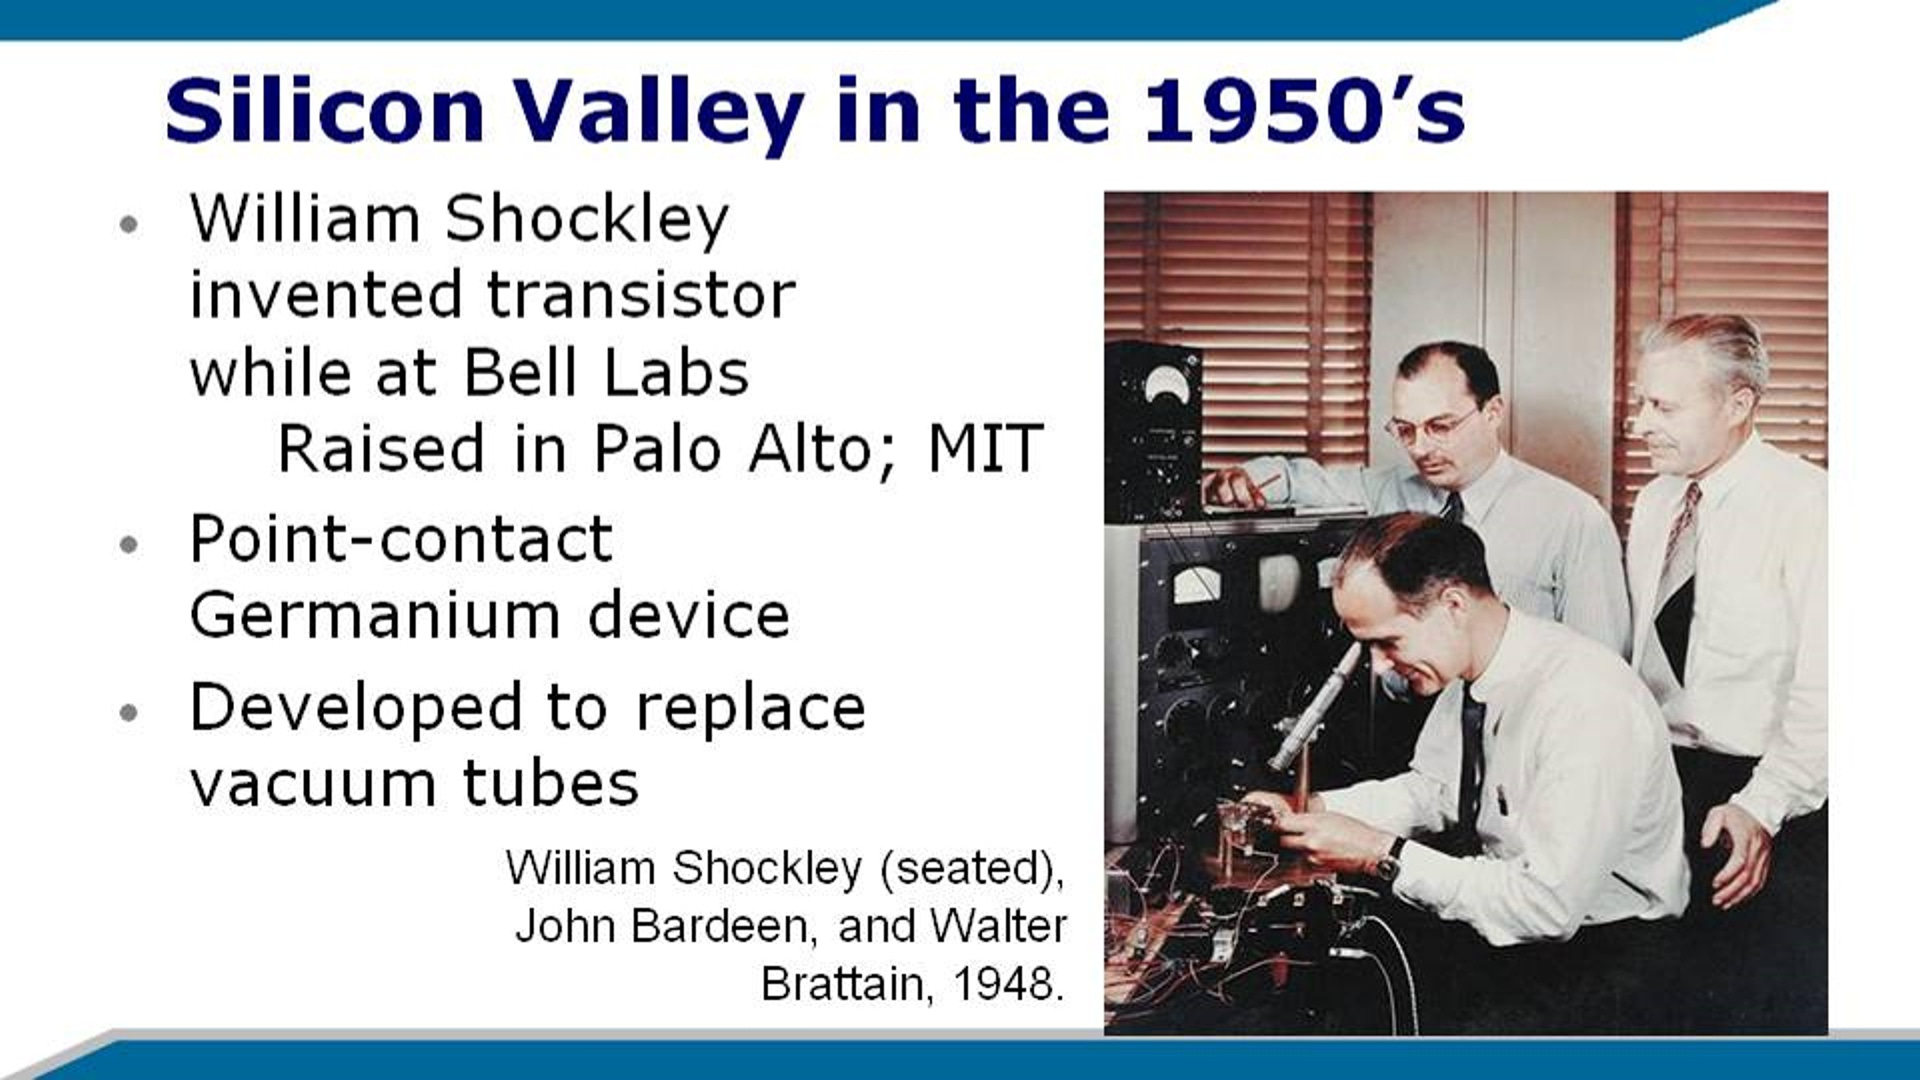 An image depicting the start of the semiconductor era in Silicon Valley.